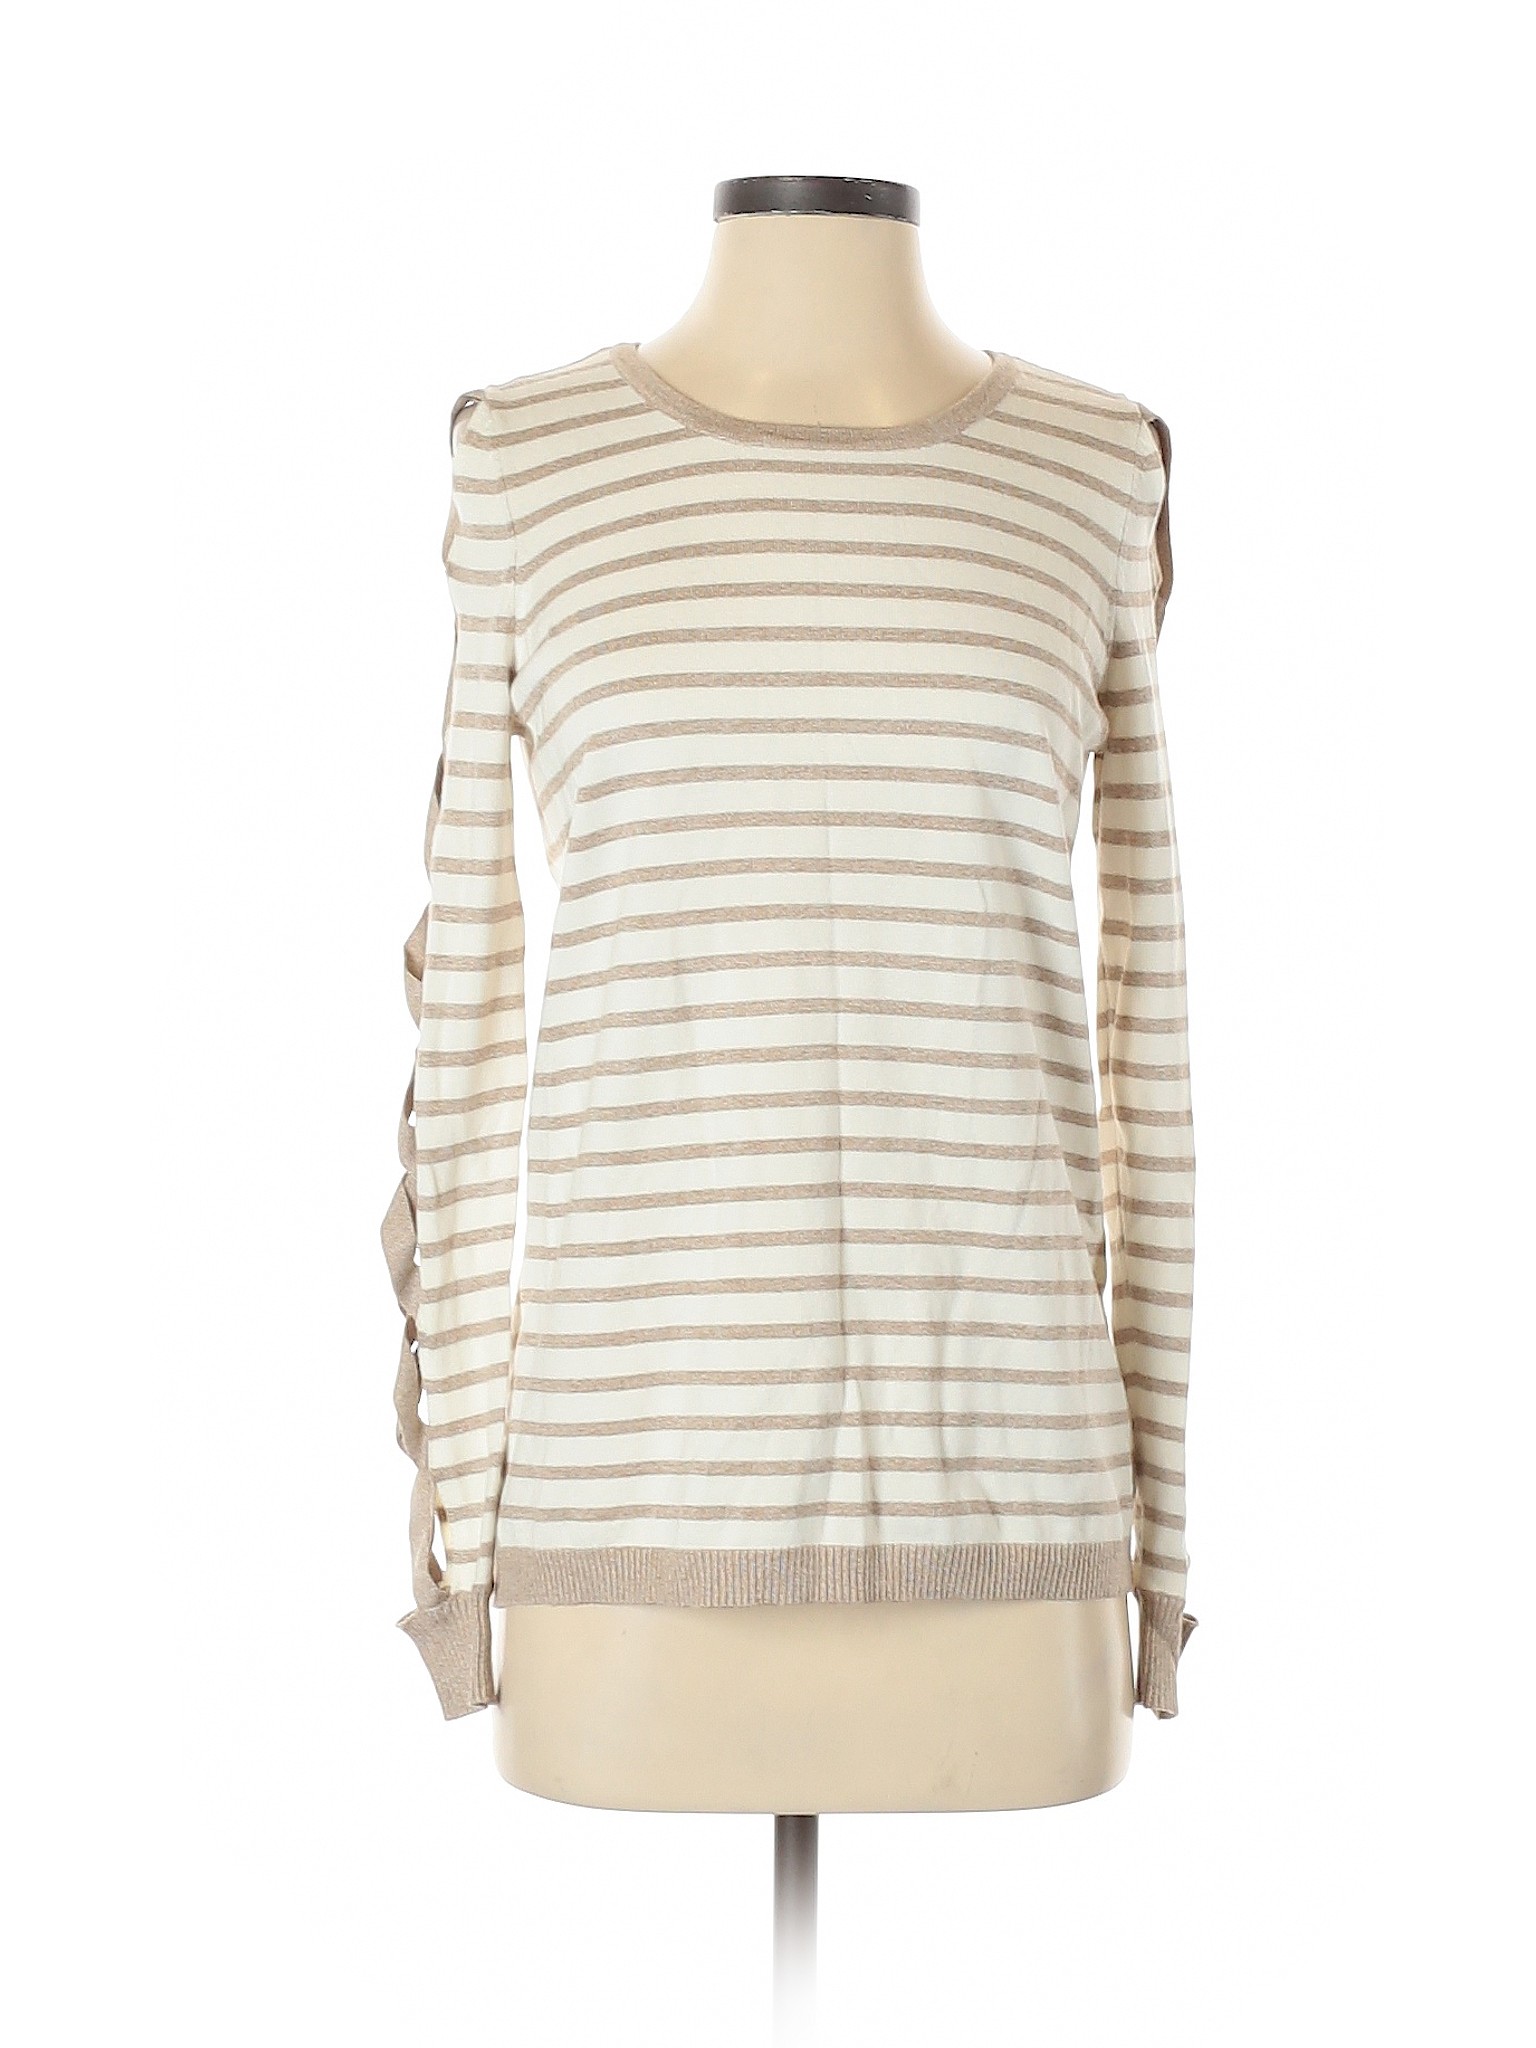 Skies Are Blue Stripes Tan Long Sleeve Top Size S - 81% off | thredUP